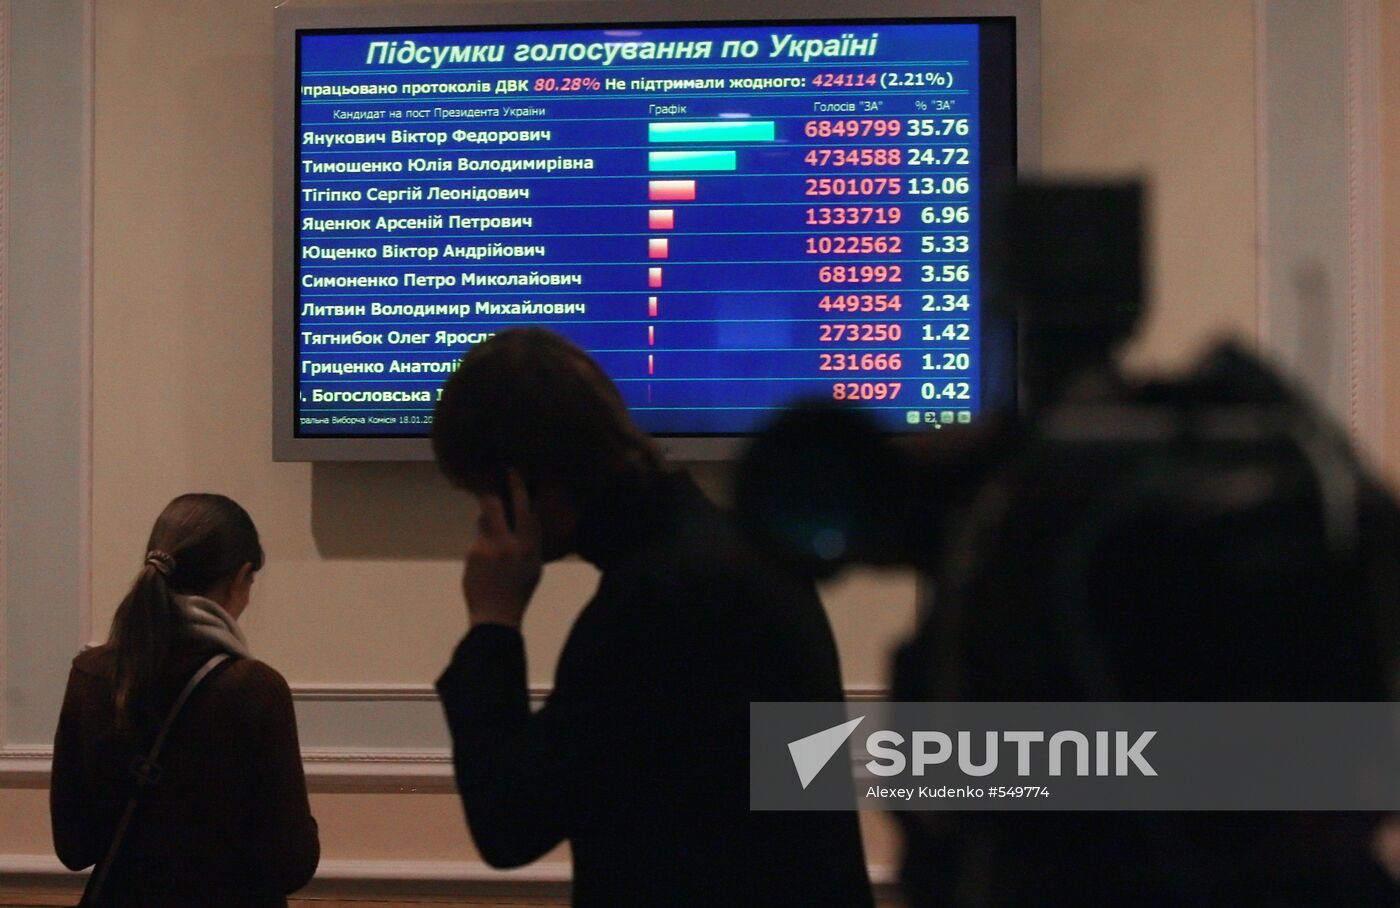 Voting results at 10 a.m., Central Electoral Commission